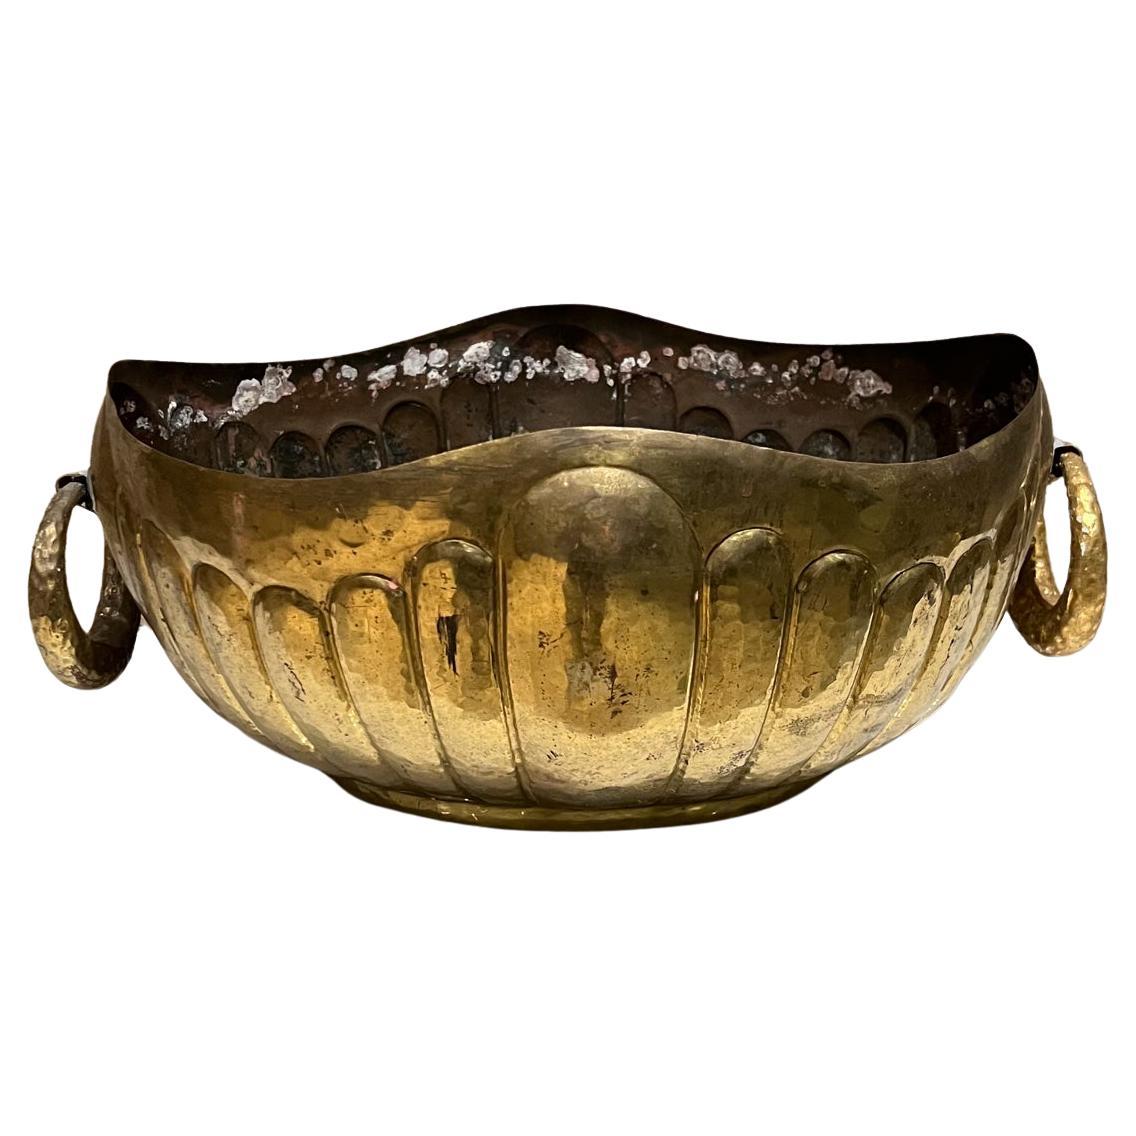 1950s Egidio Casagrande Exquisite Italian Hand Hammered Brass Bowl ITALY
7 tall x 16.5 w x 12.5
Made in Italy. Stamped underneath.
One handle has been reproduced. 
Preowned original vintage condition, unrestored patina.
Refer to all images provided